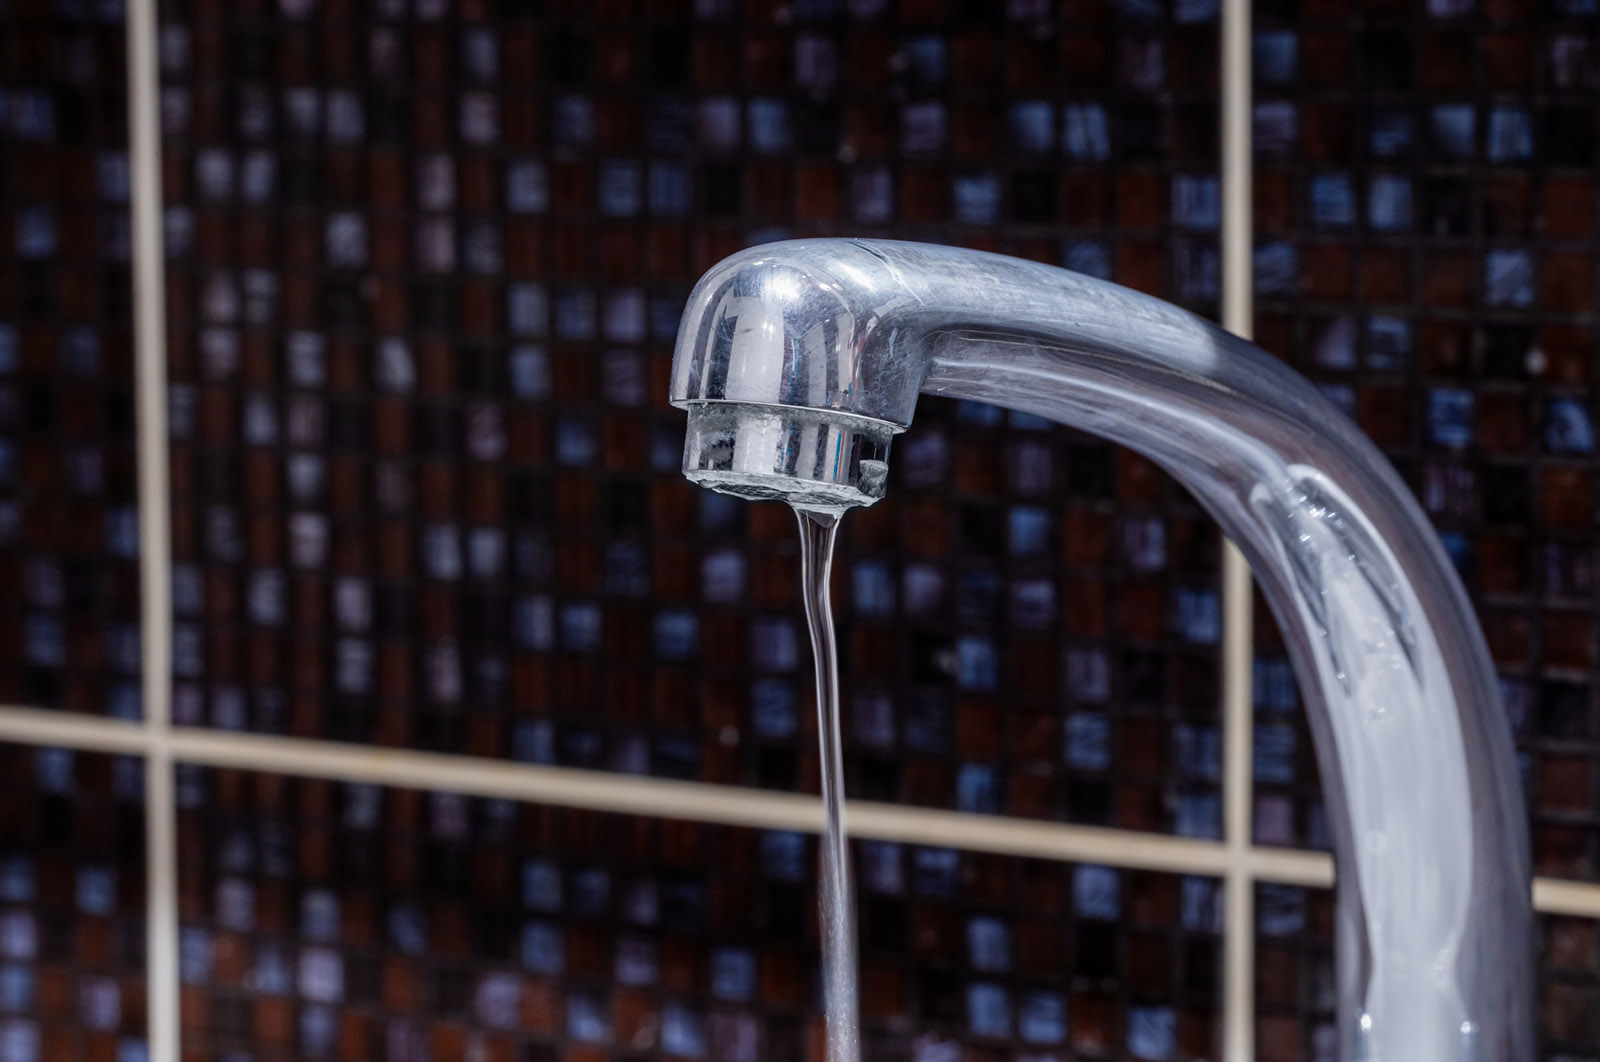 A faucet with low water pressure